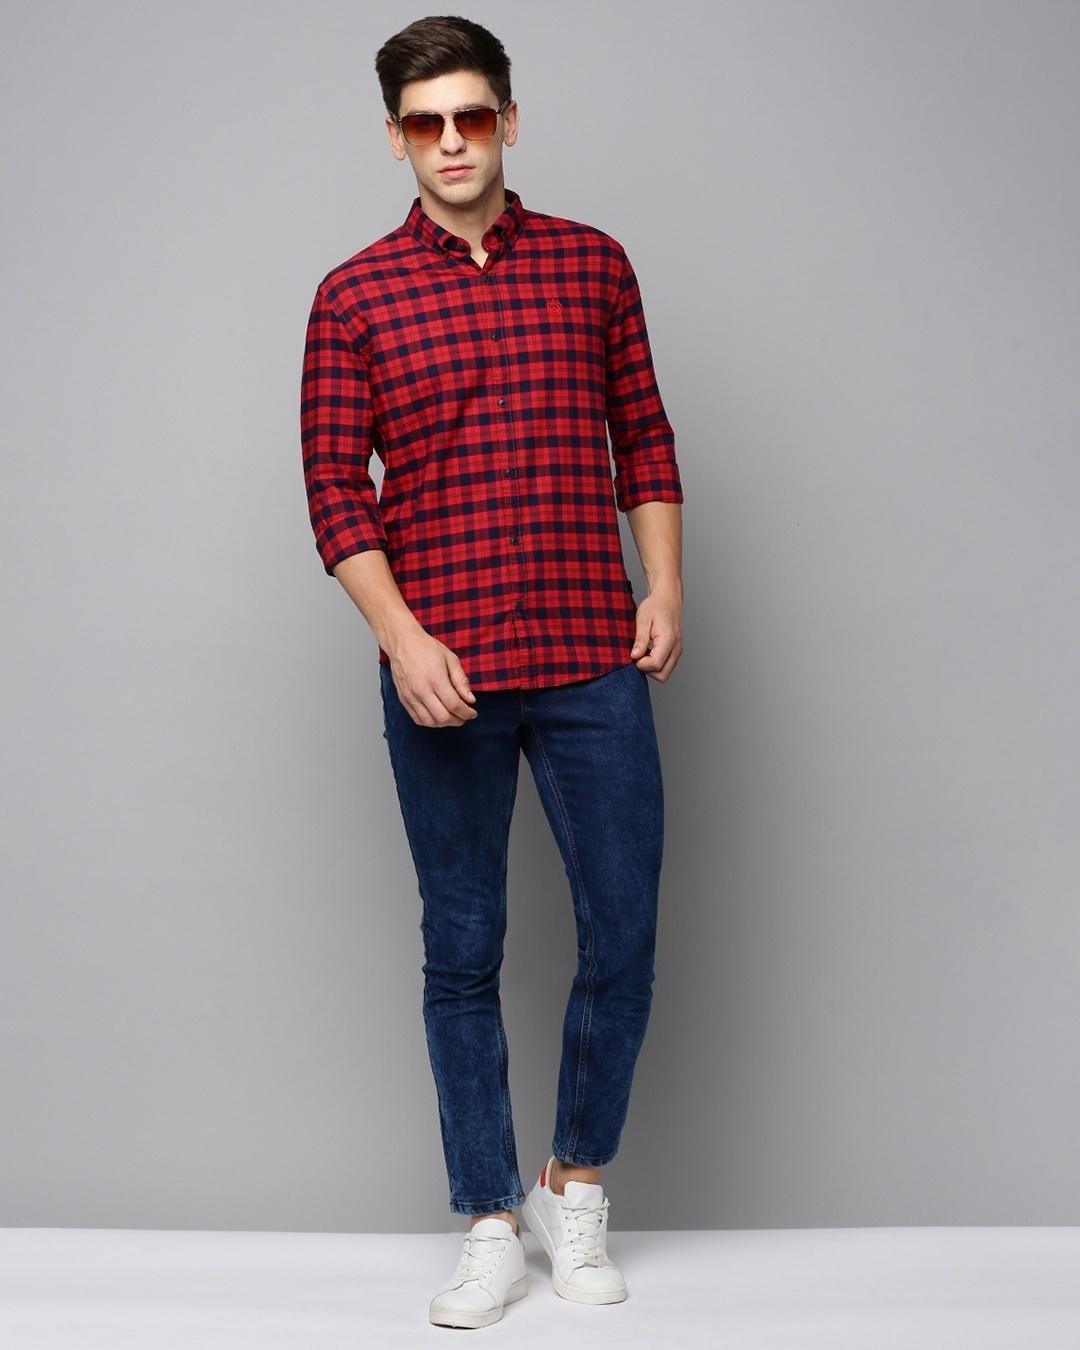 Men's Red Checked Slim Fit Shirt